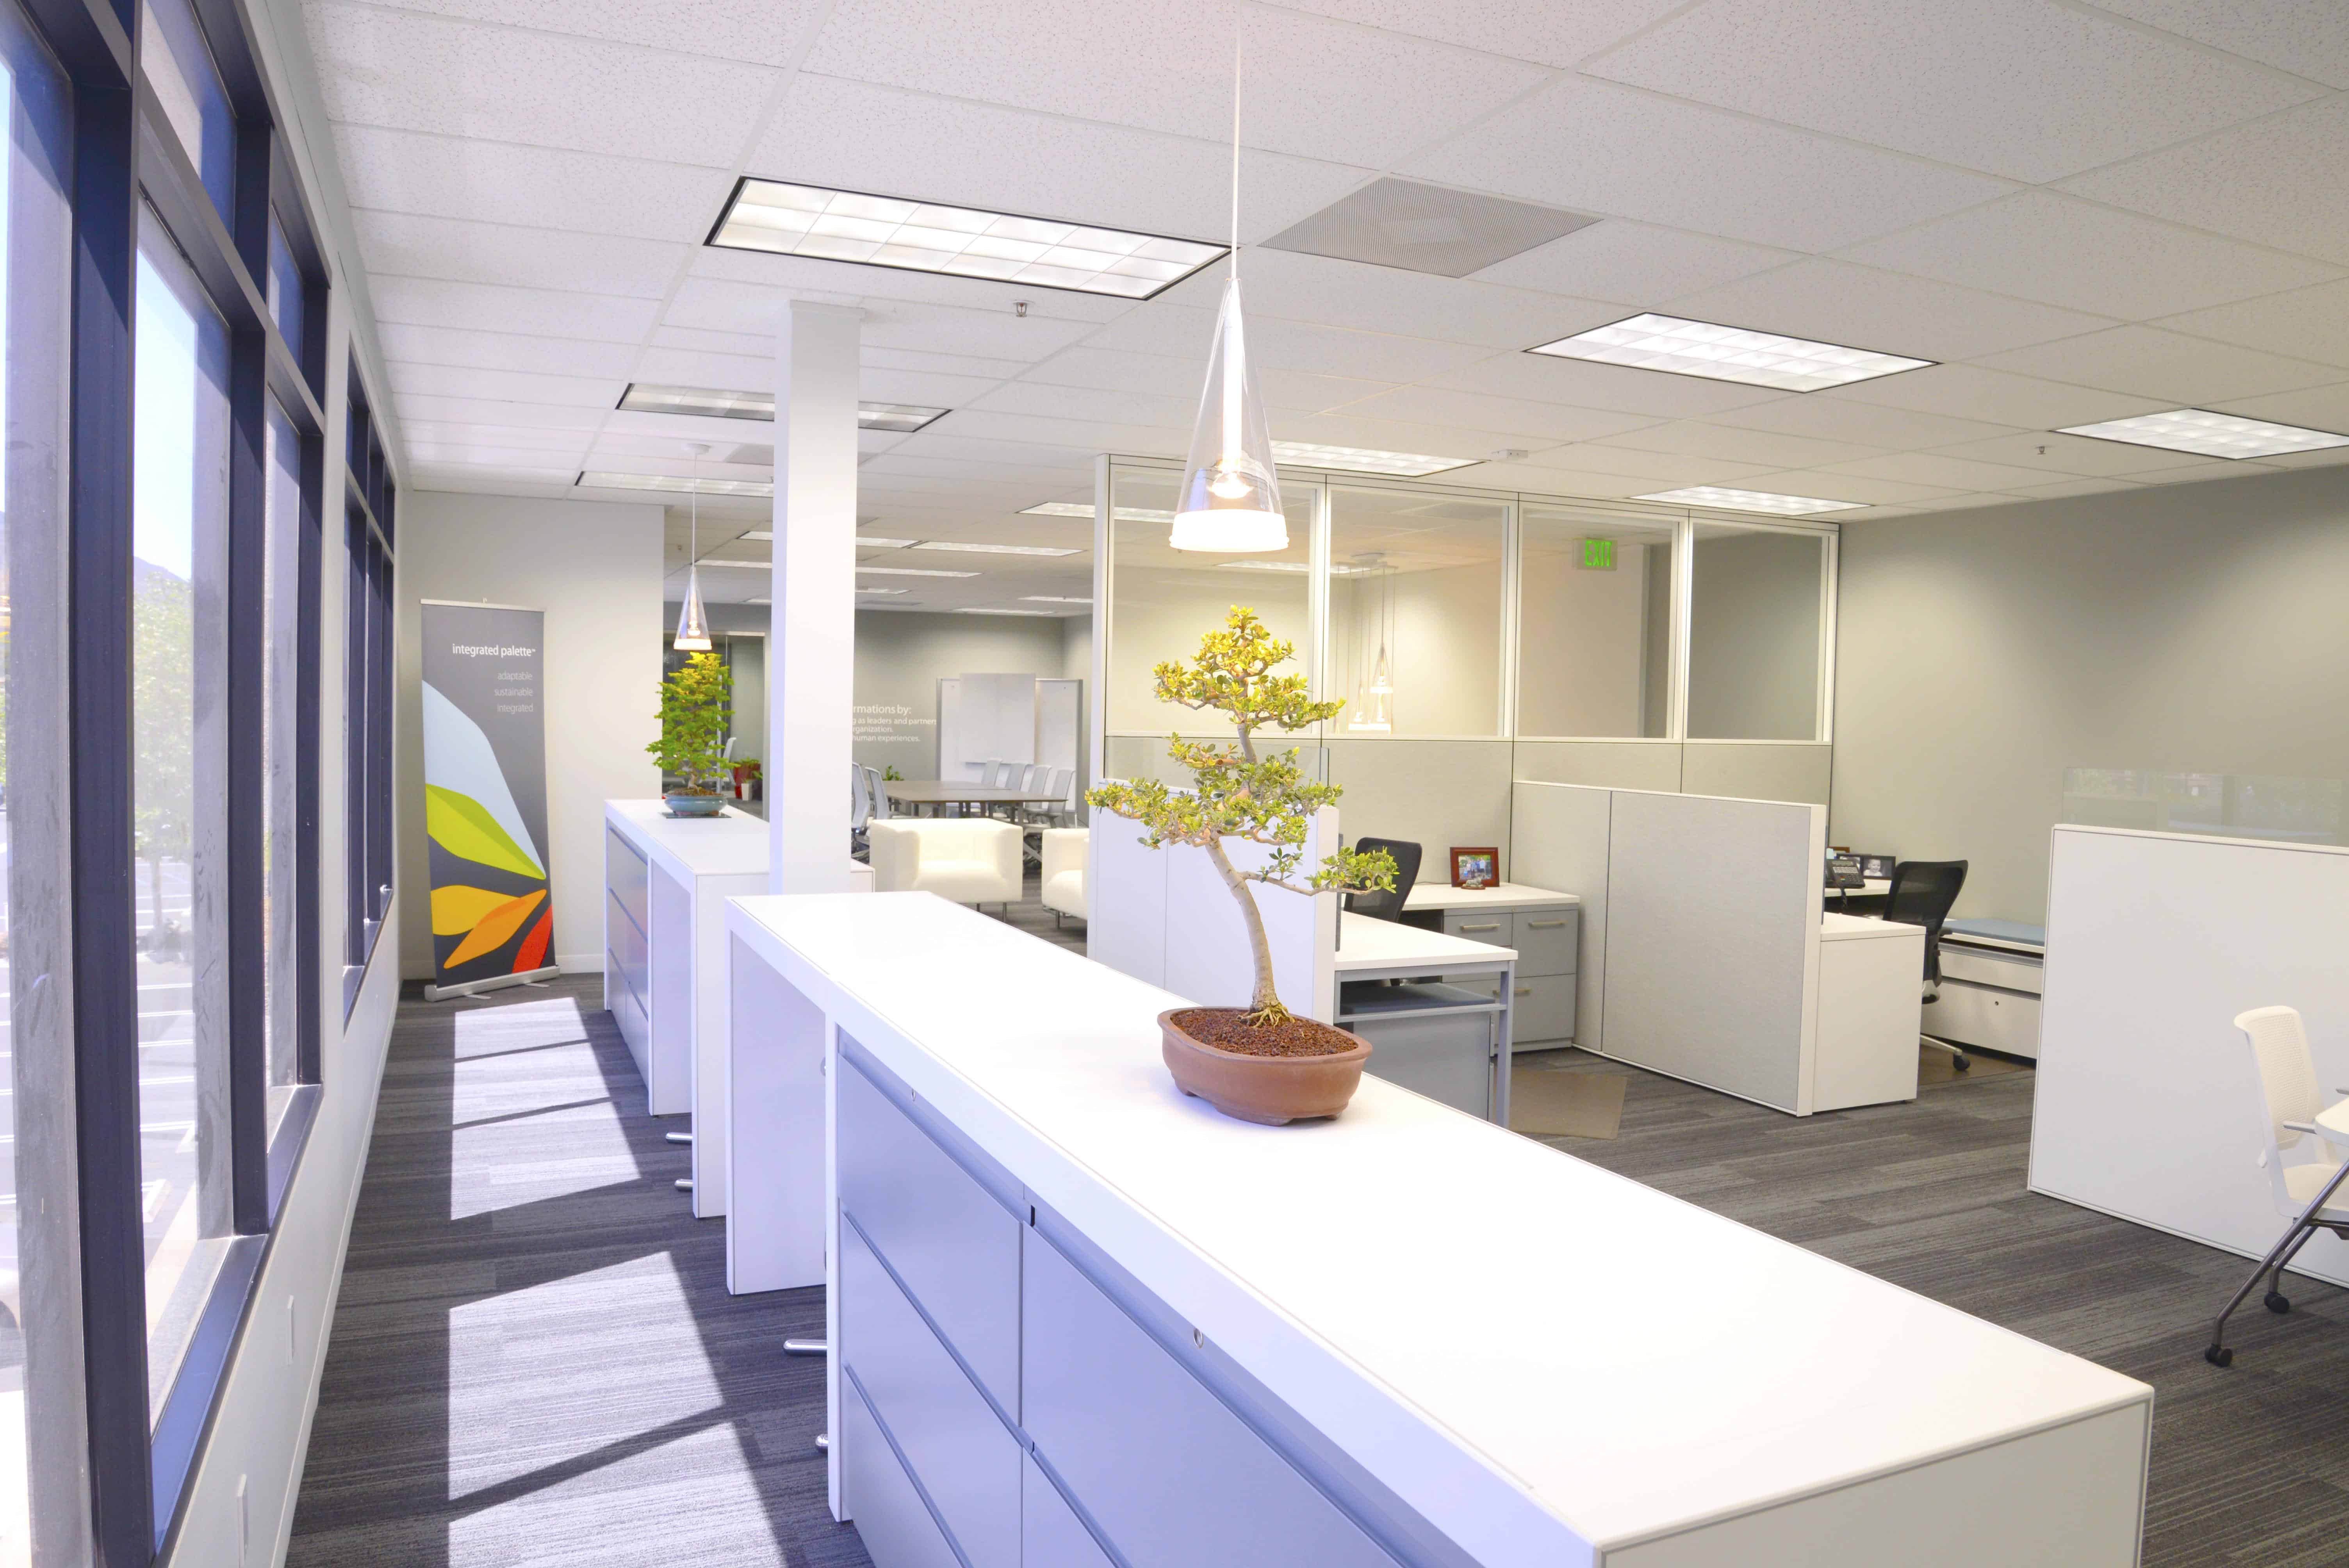 New interior Showroom Remodel at Pacific Office Interiors